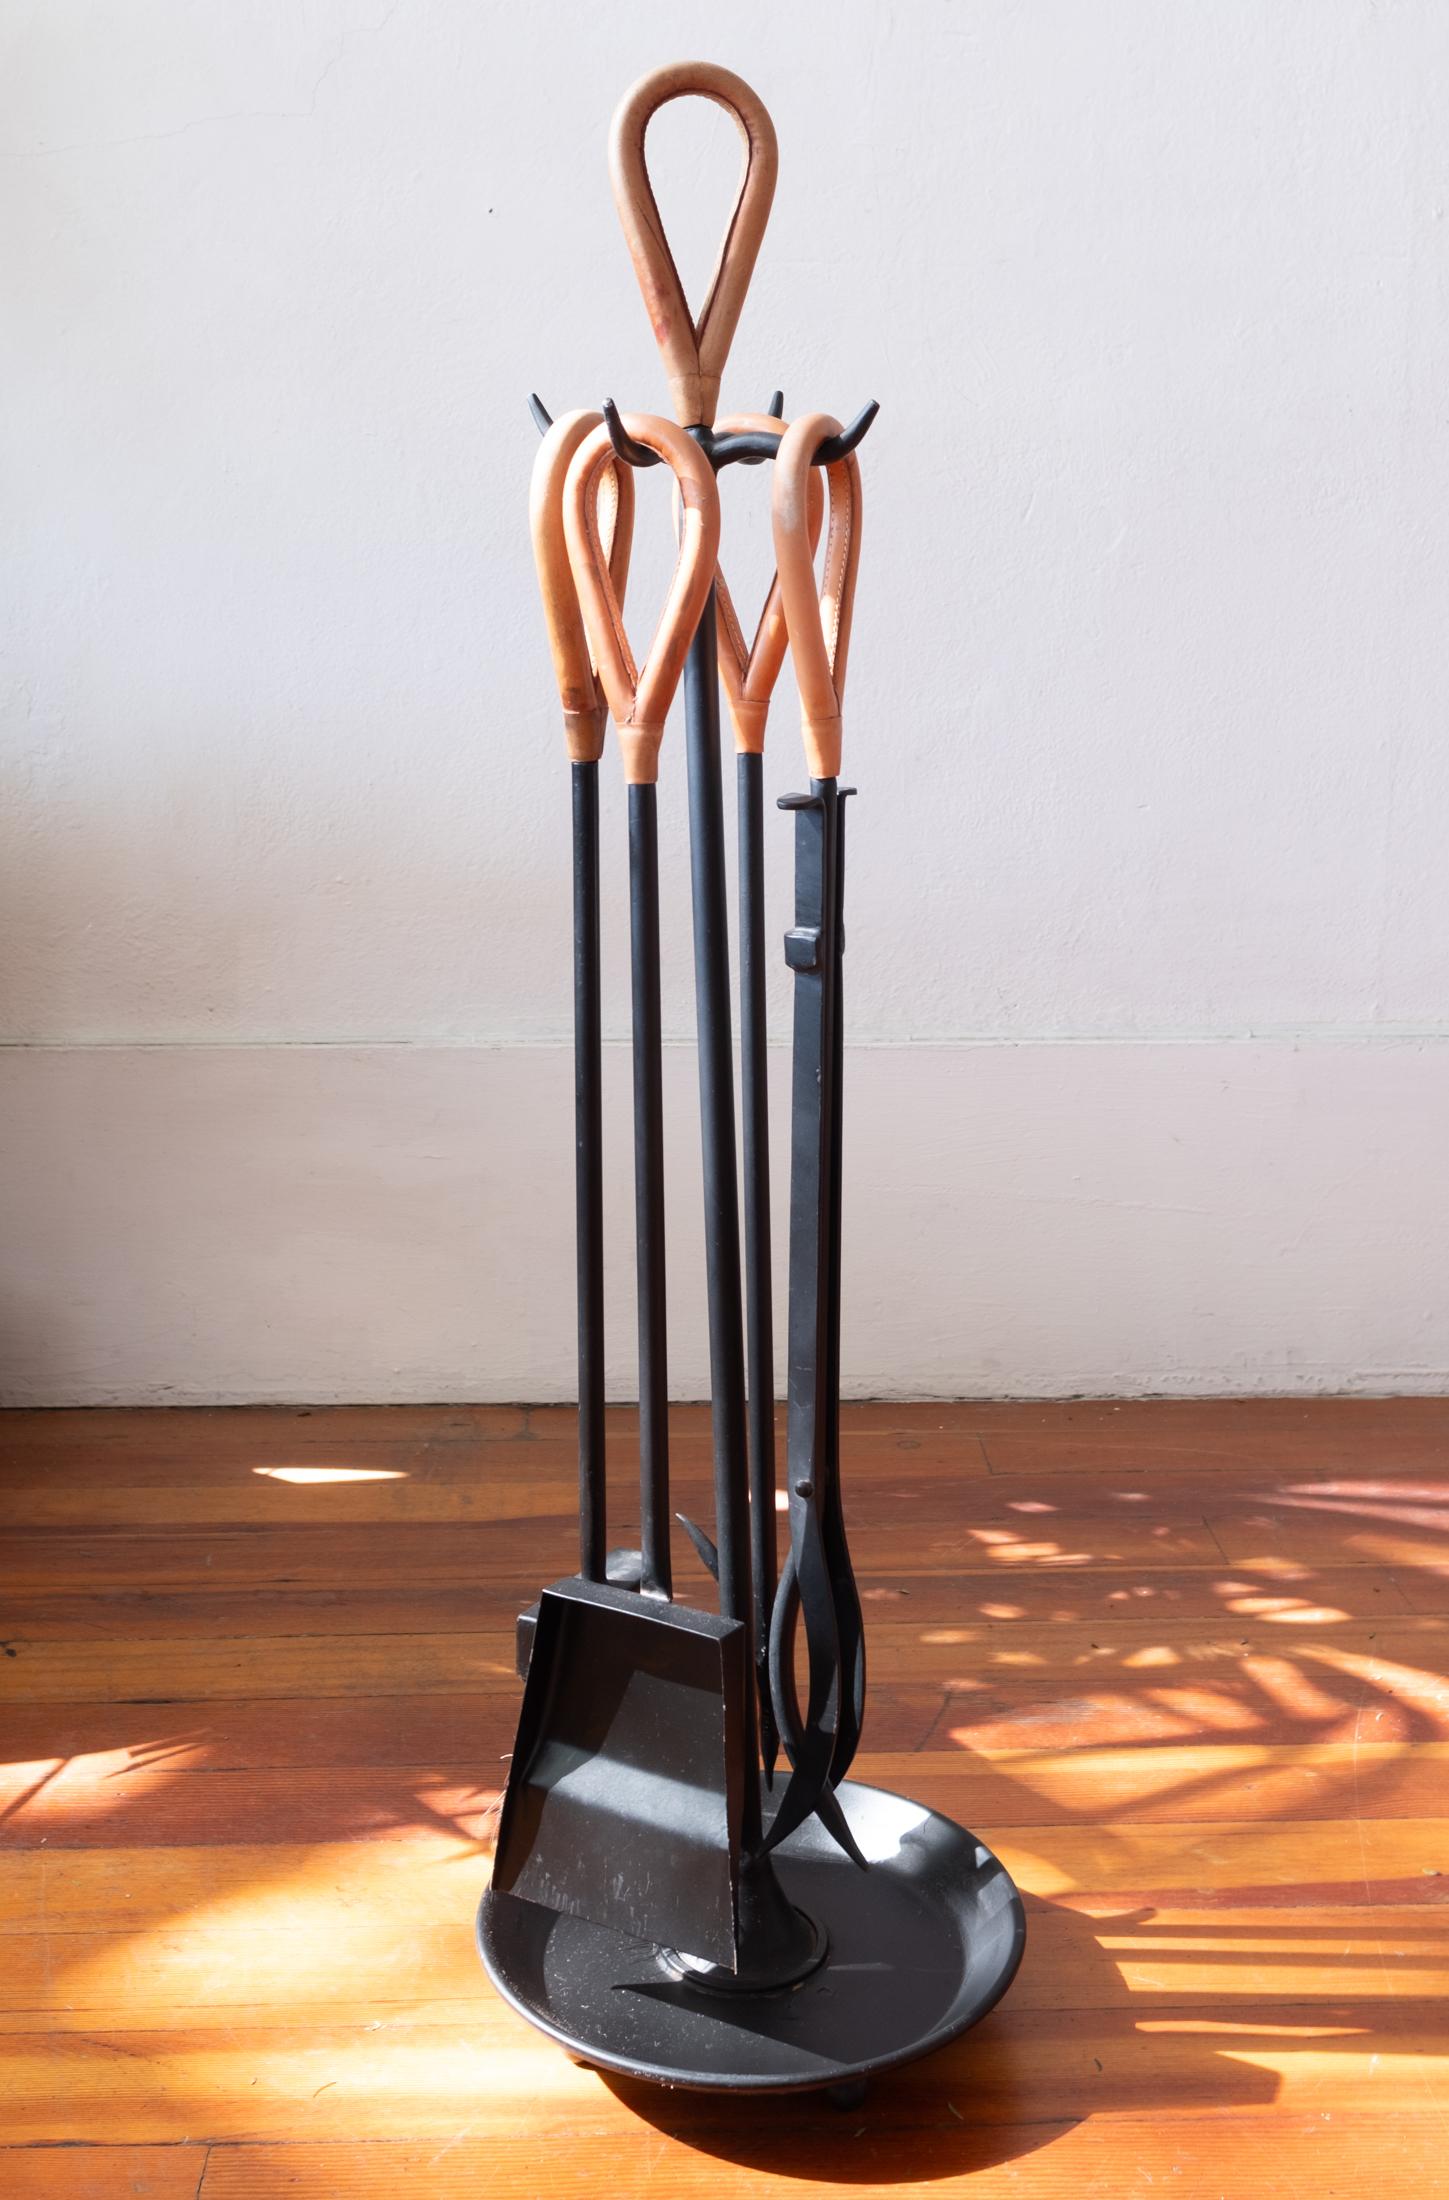 A nice modernist fire place tool set with leather wrapped handles.